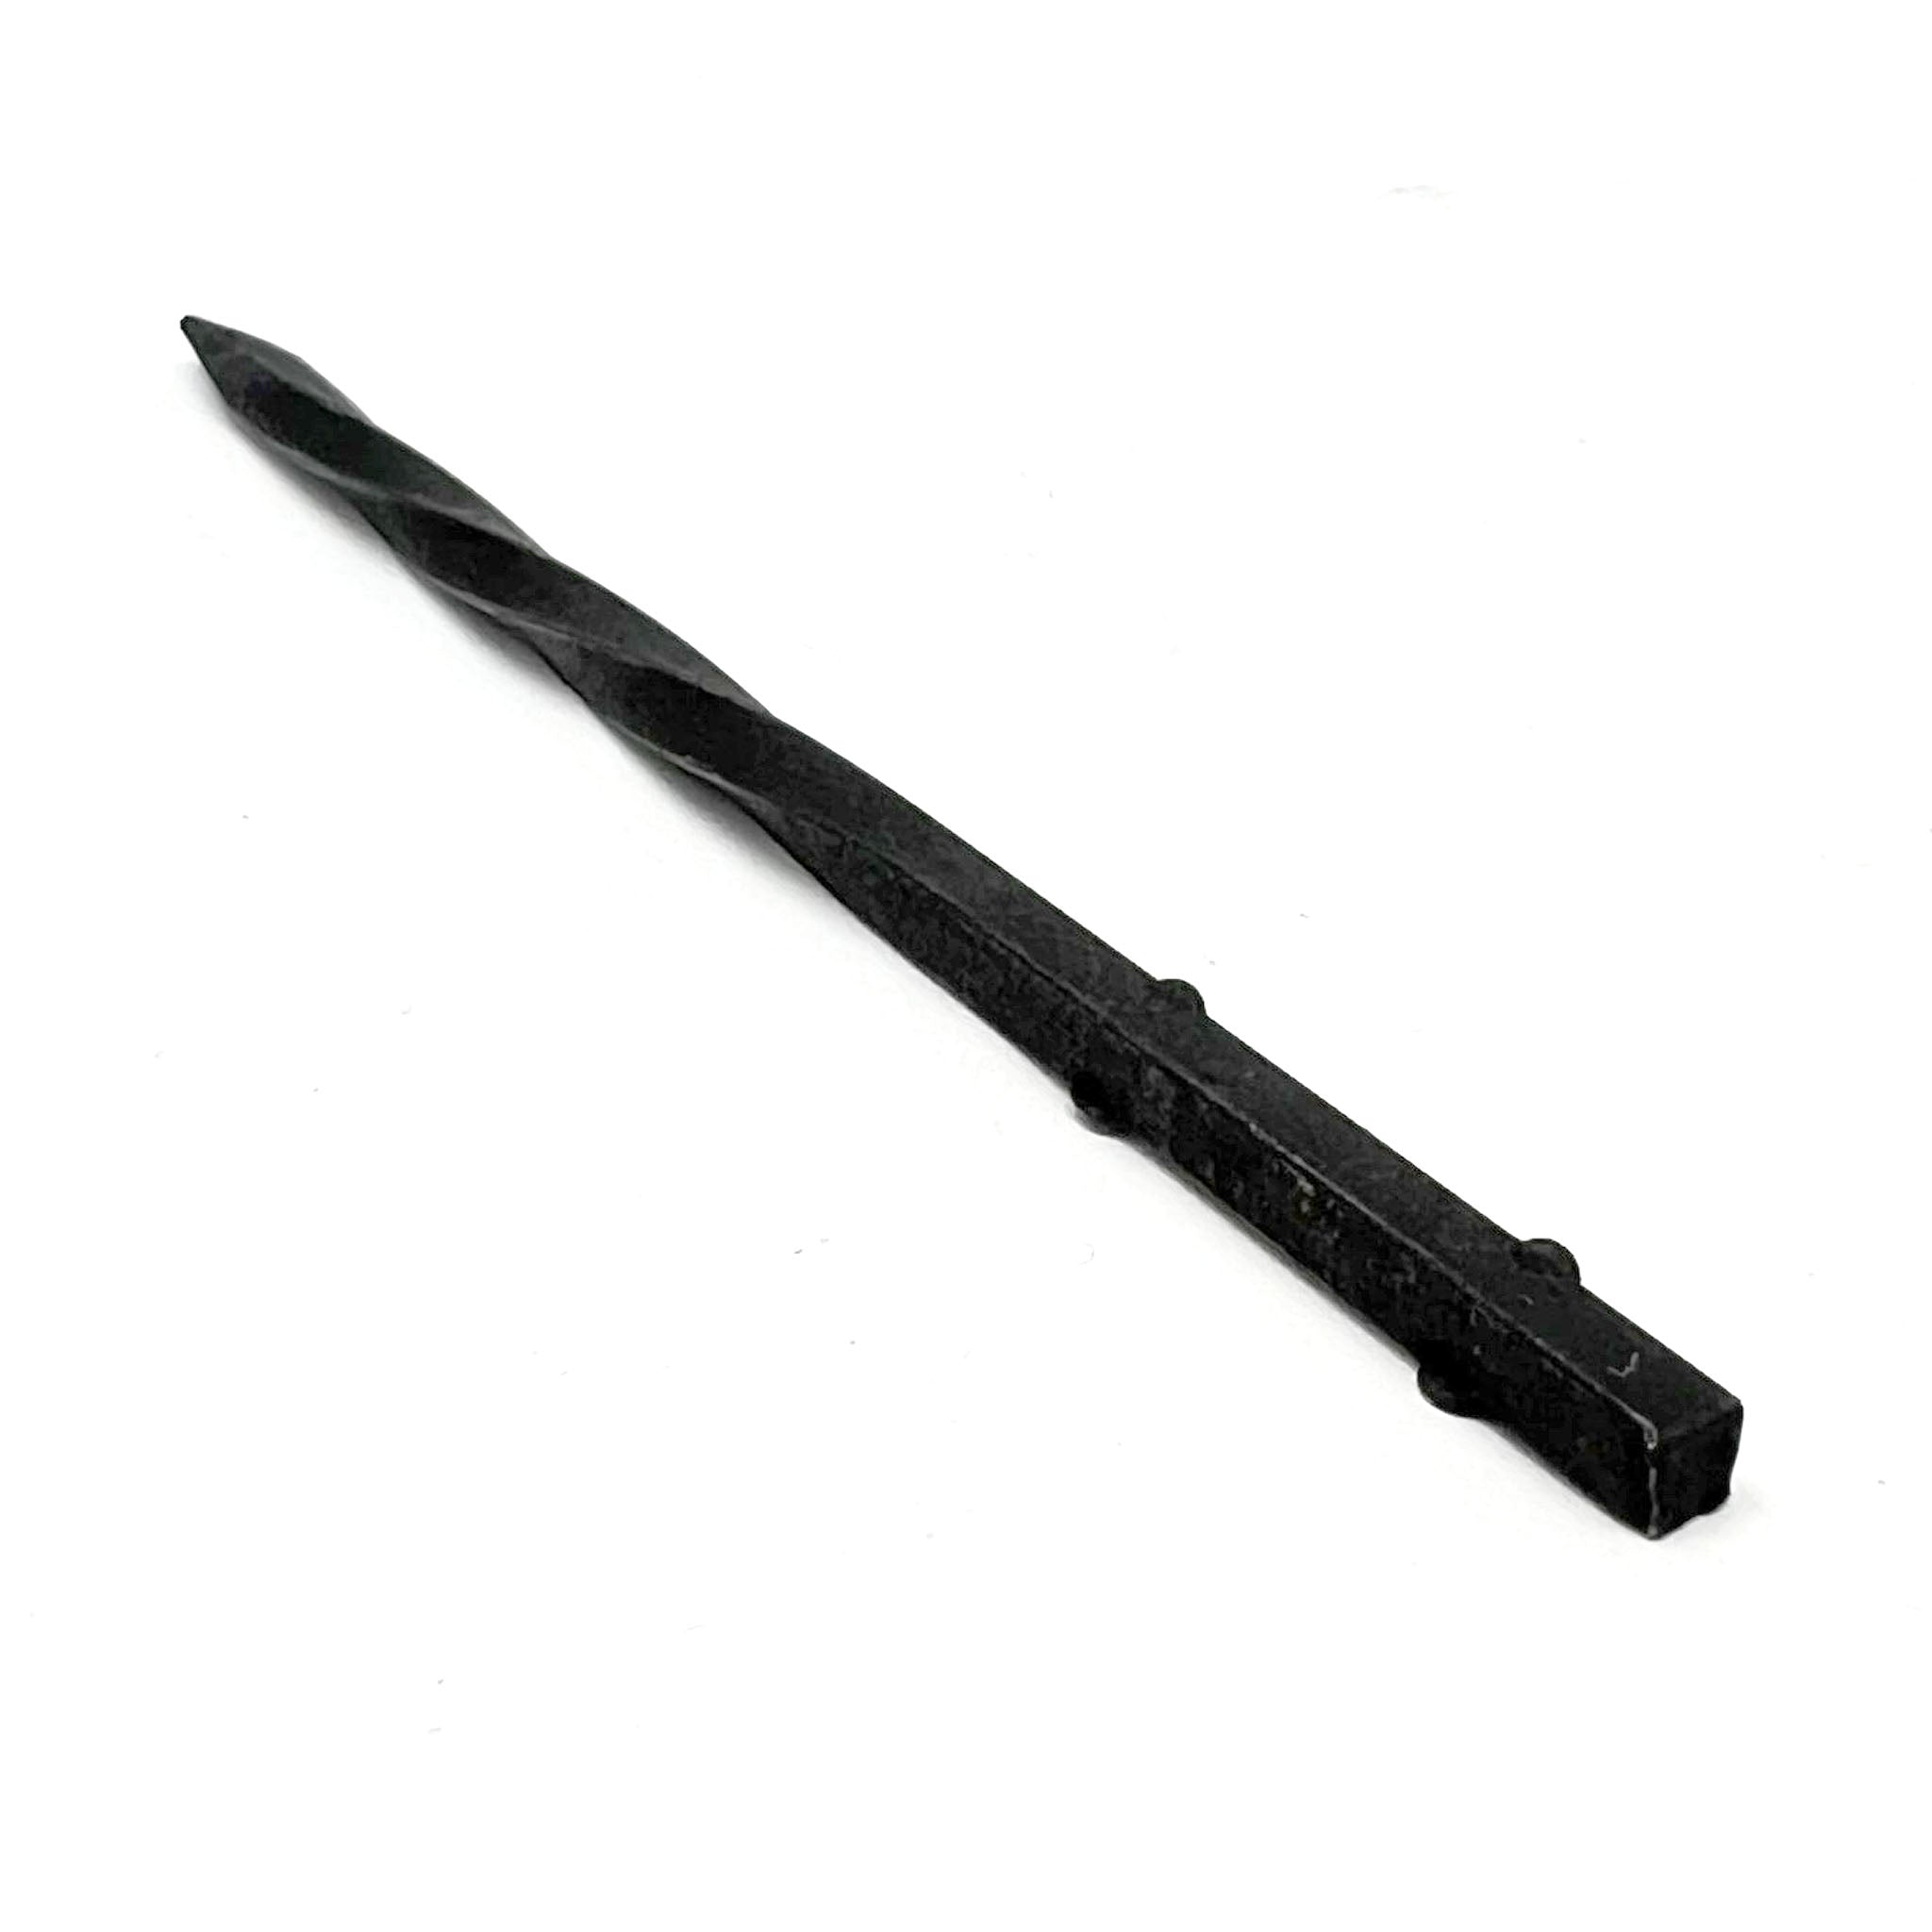 5 1/2" Replacement Probe